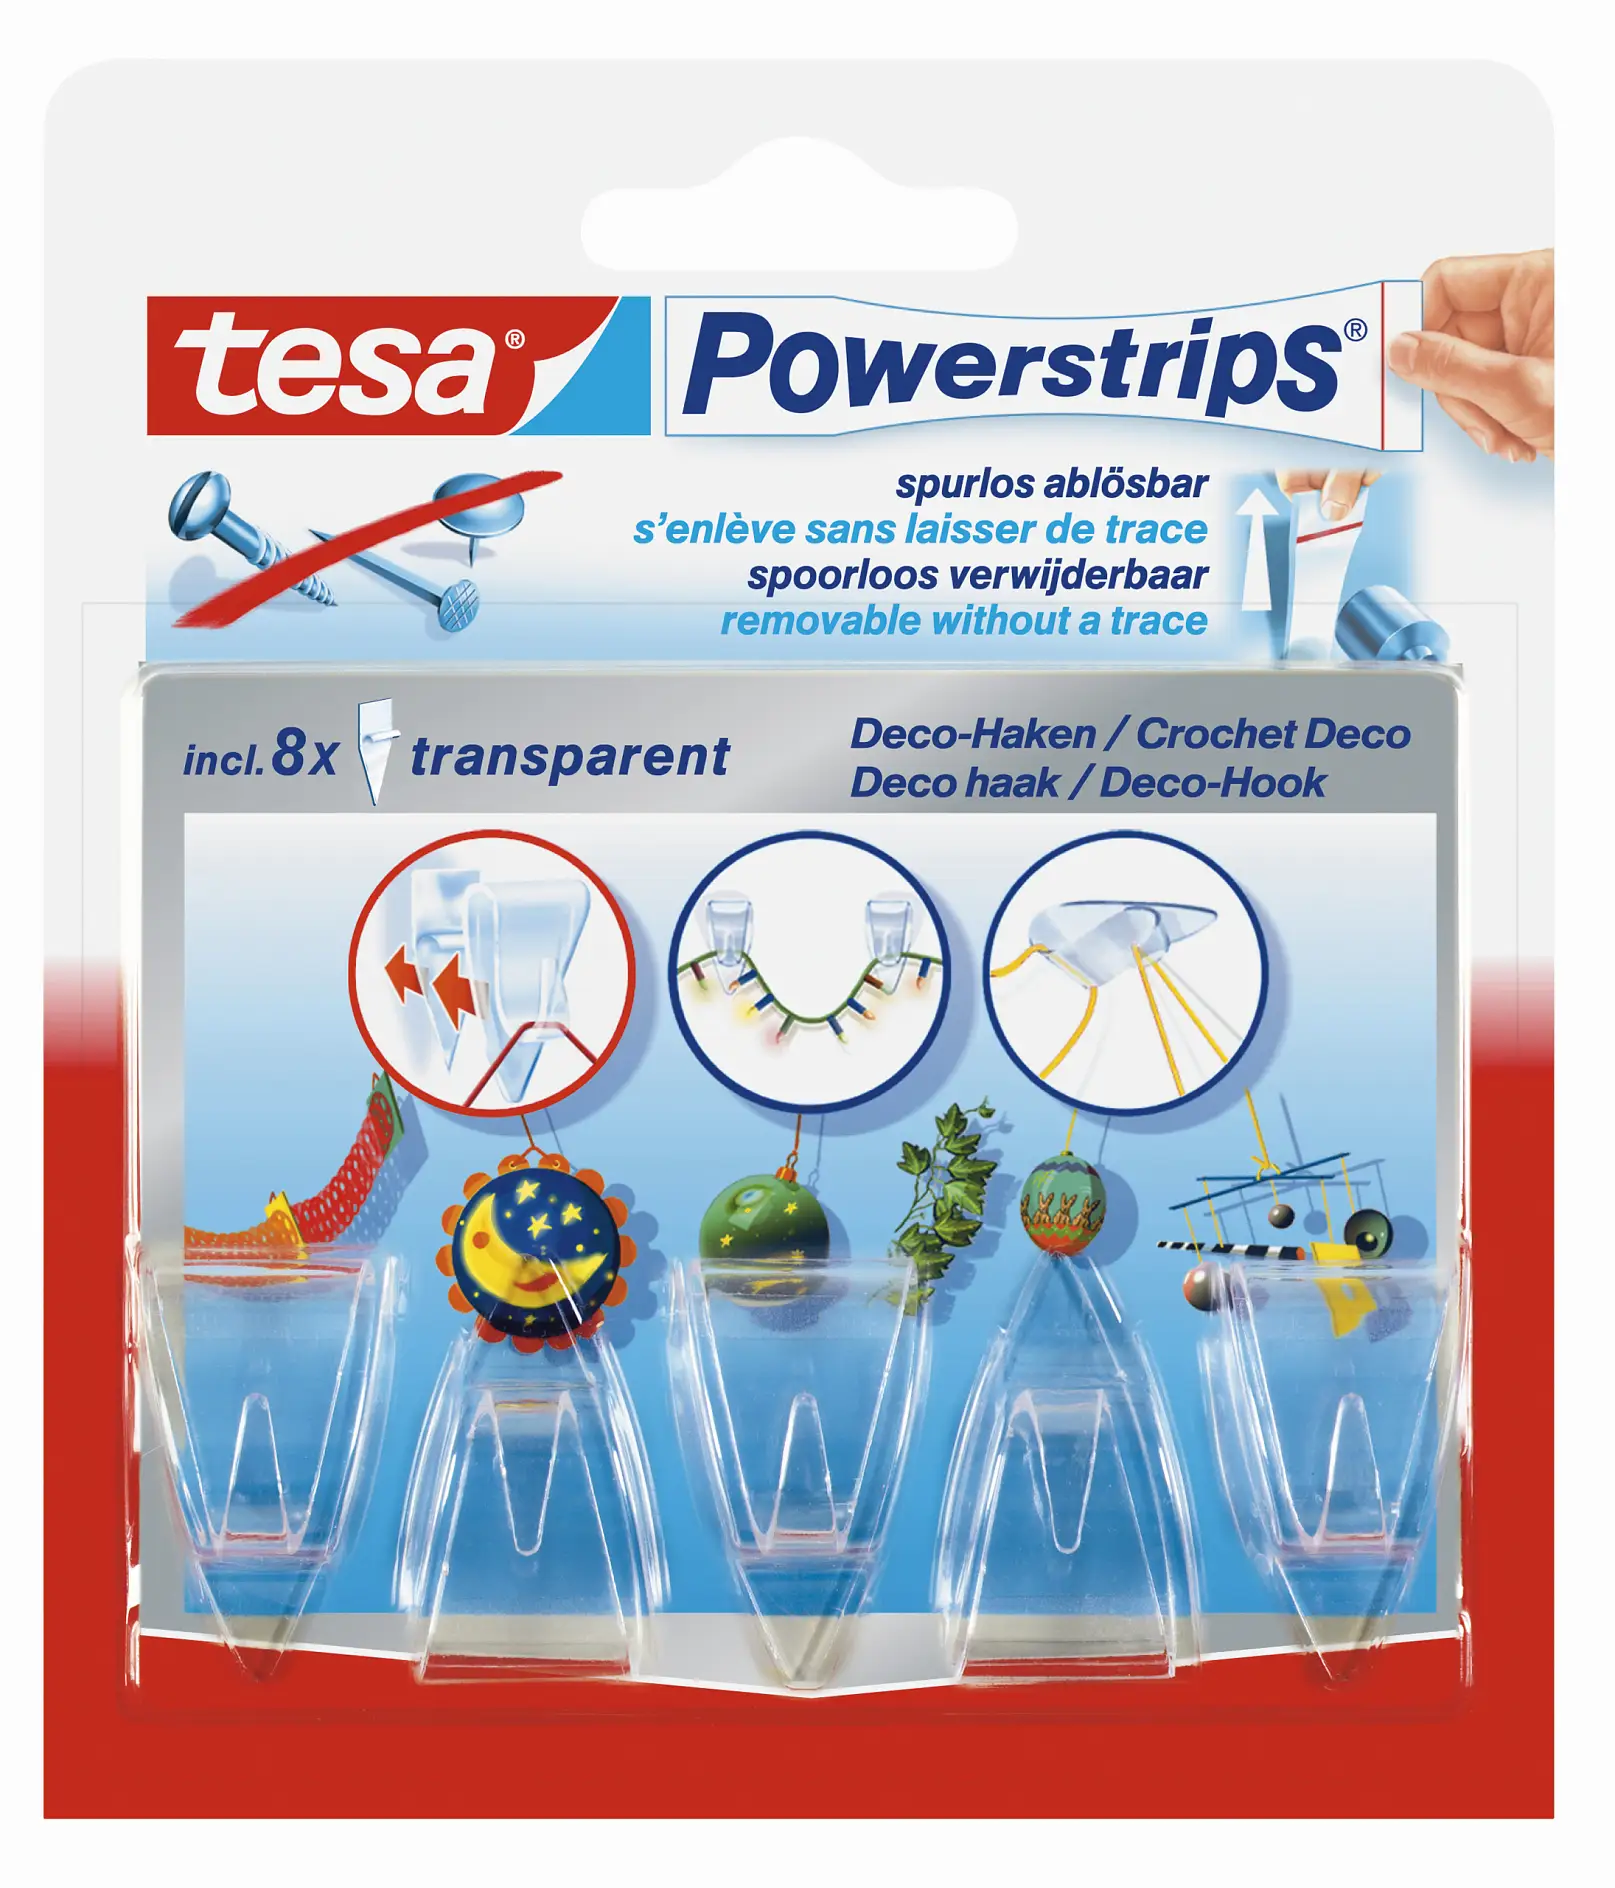 They steadily fix small decorative items, are almost invisible, can be removed without a trace and re-used with new tesa Powerstrips® DECO. Box with 5 hooks und 8 strips for 4.89 Euro.